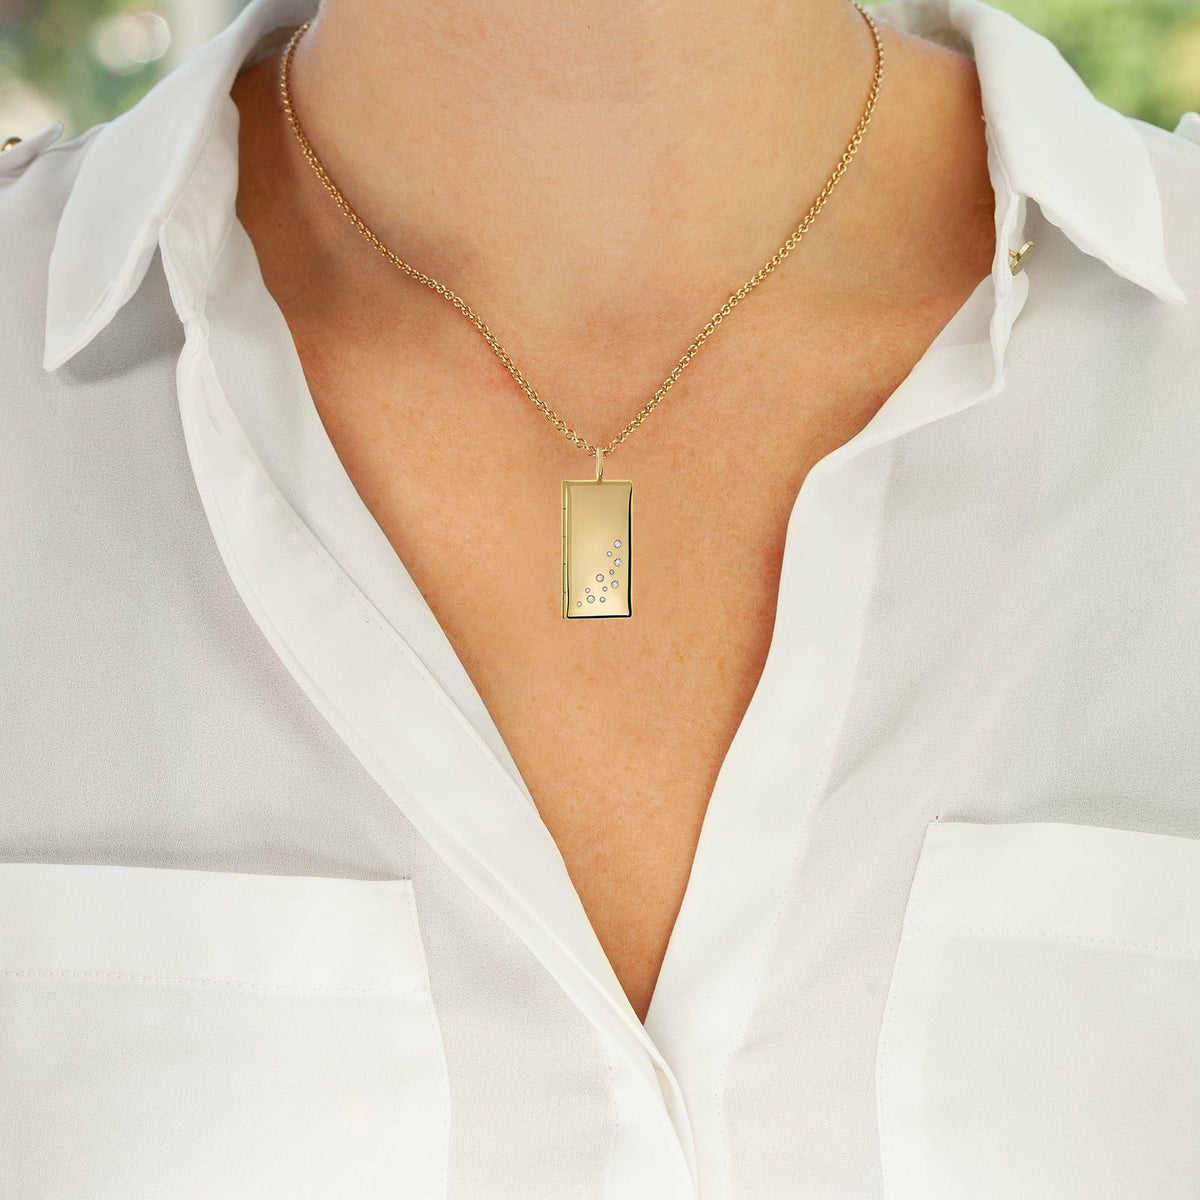 Gold Rectangular Locket with Diamonds and a Personalized Page